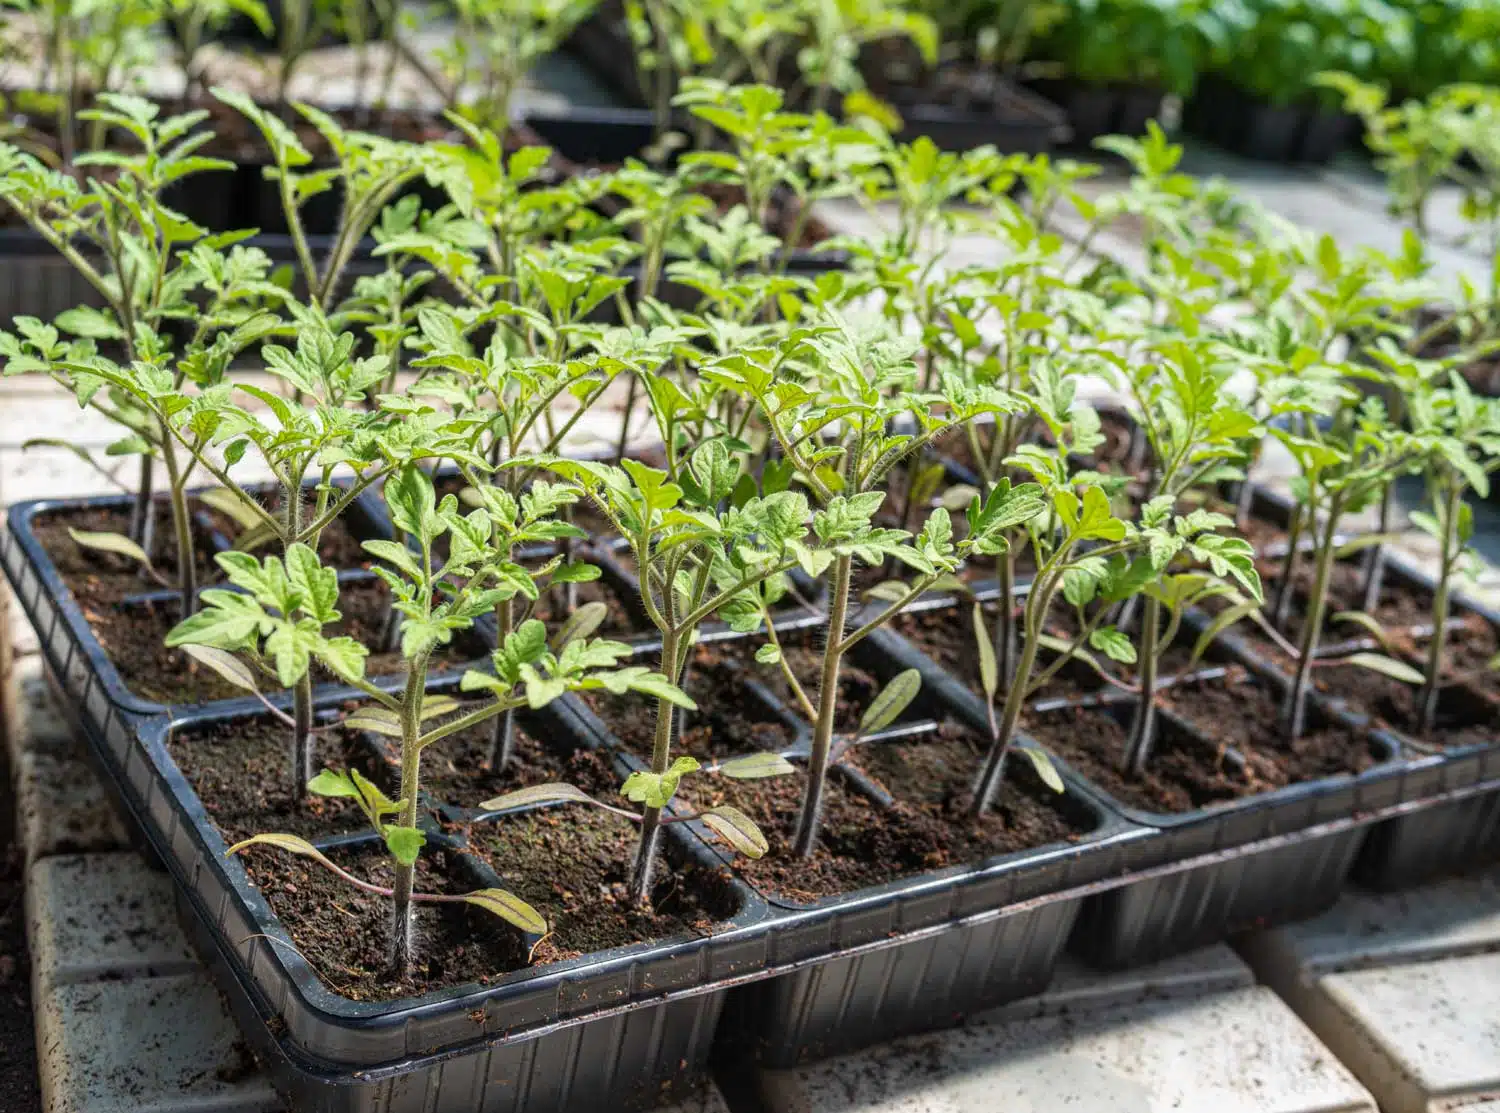 Tomatoes in seed tray - pre-germinated